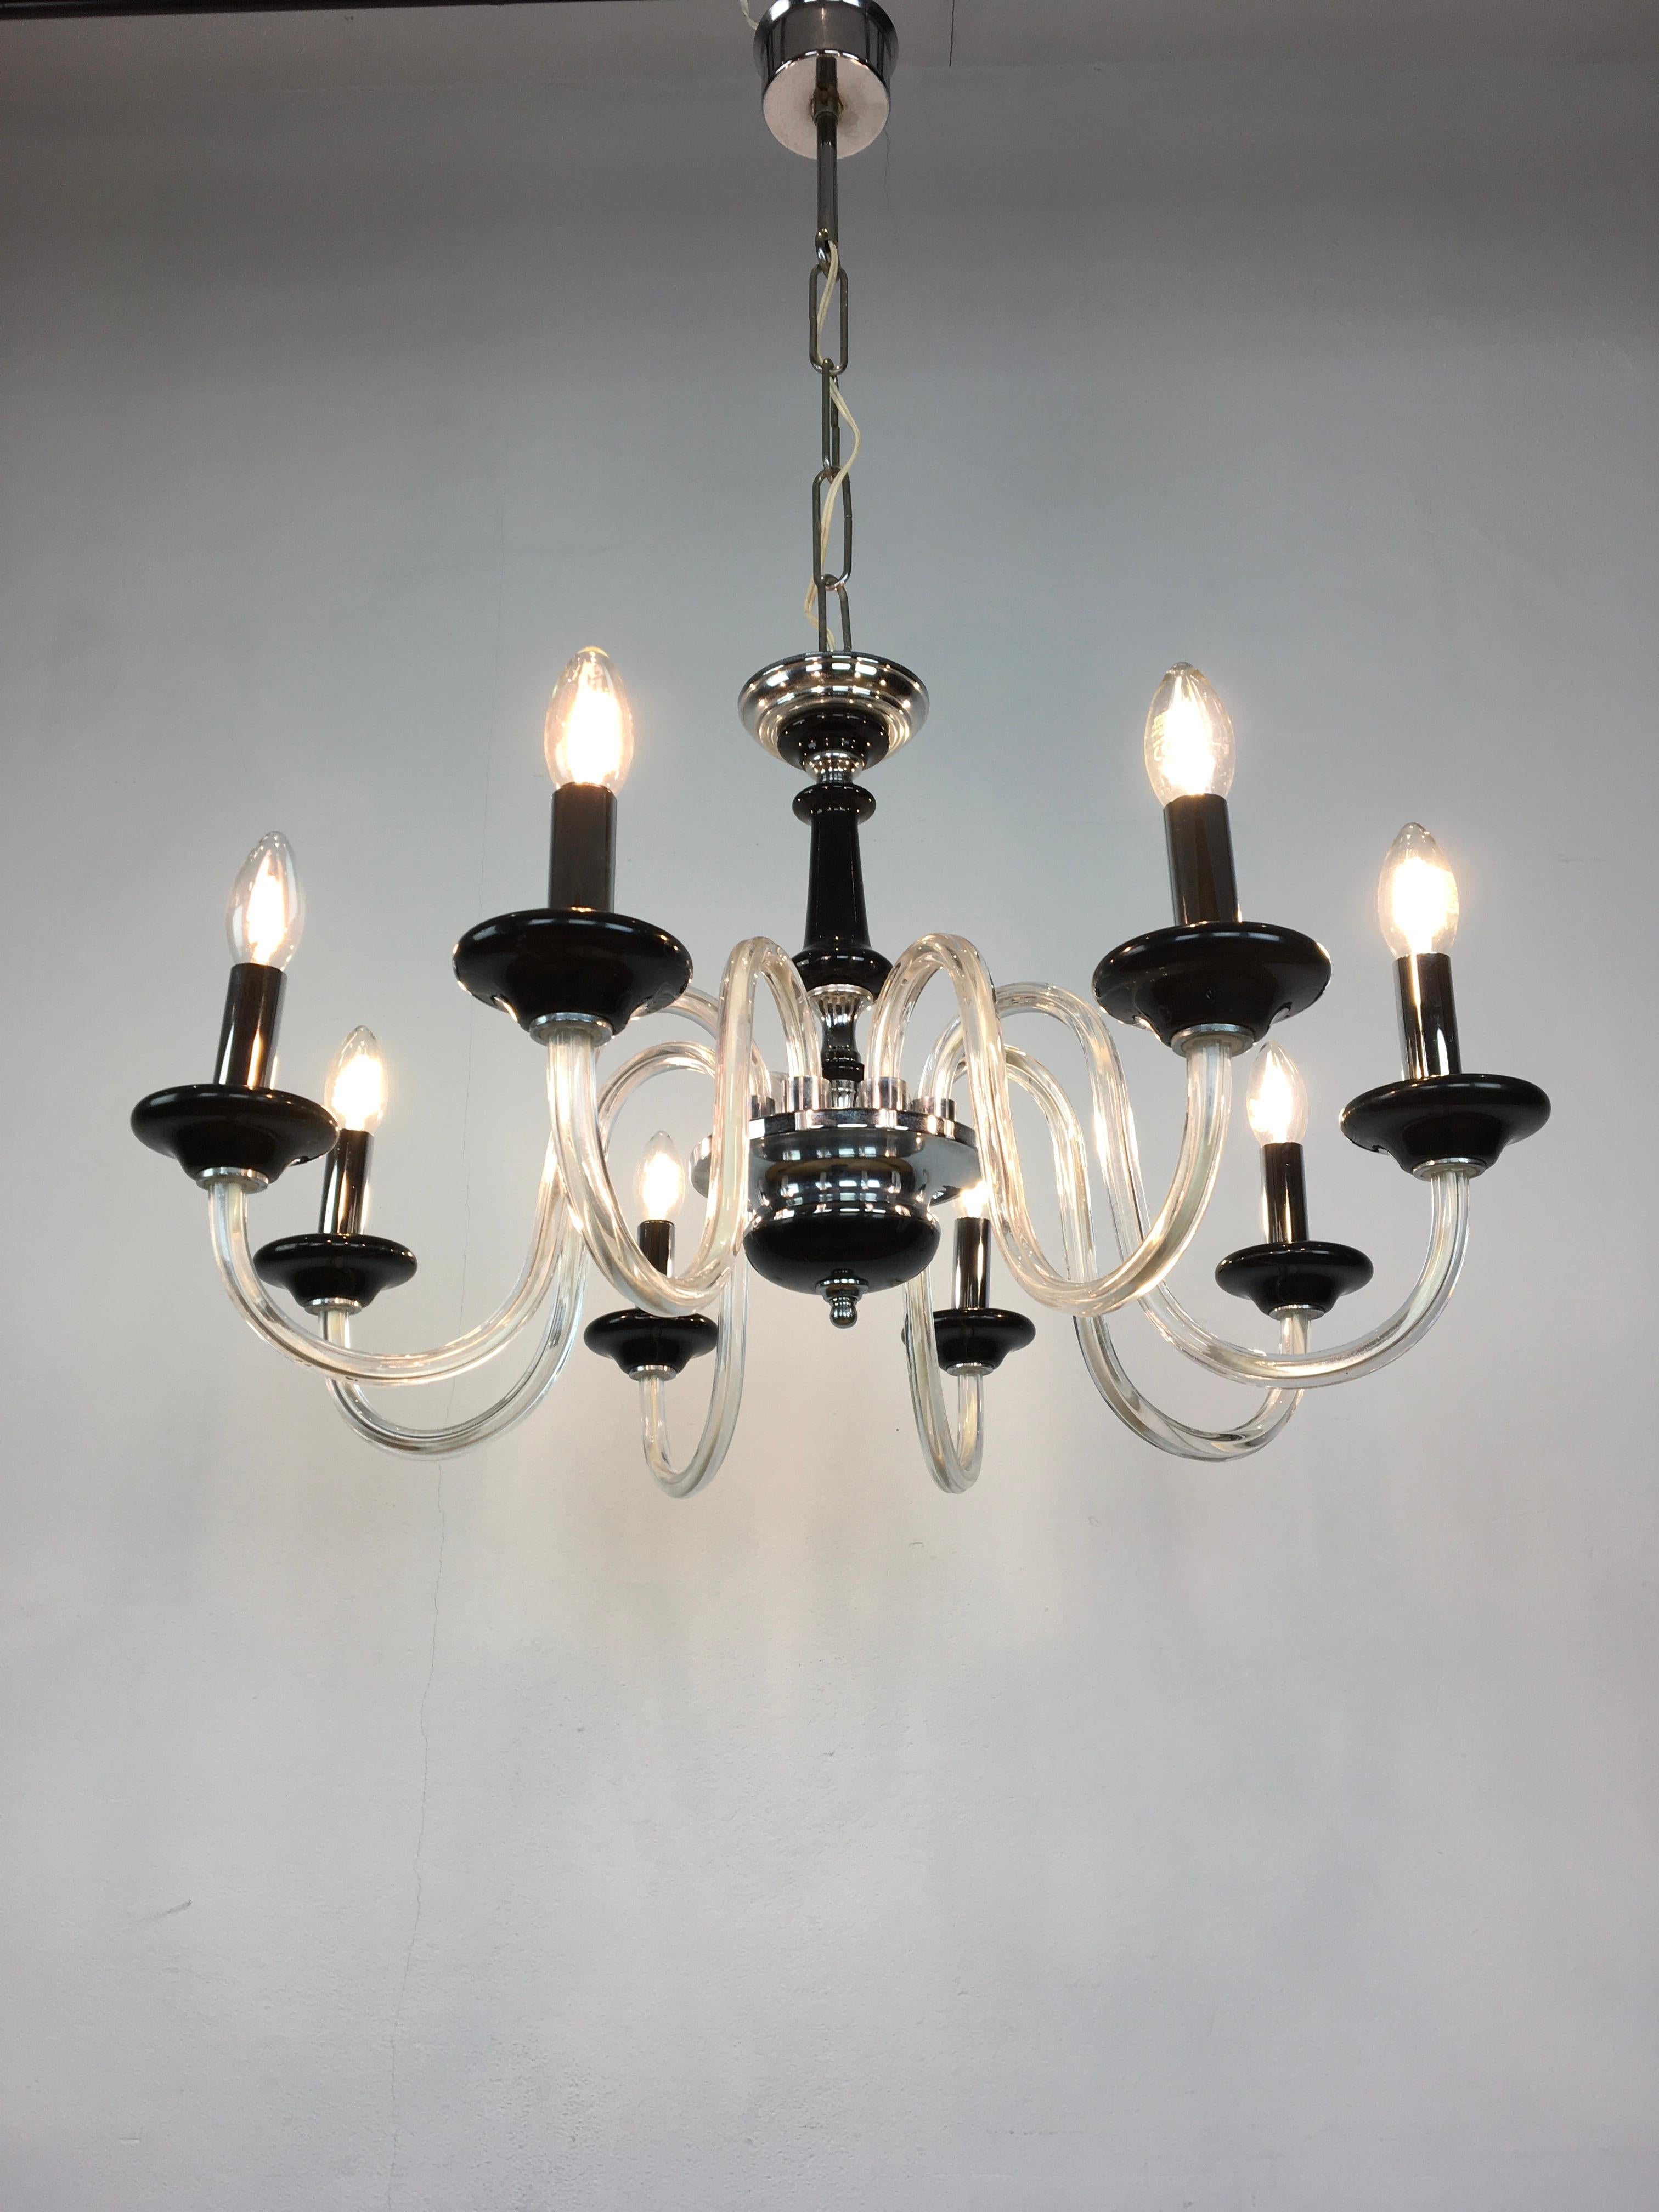 Black 8-armed Murano glass chandelier. 
A Mid-20th Century black ceiling light with 8 curling arms.
A great looking vintage Italian chandelier or ceiling light with black murano glass details and chromed tube covers. 

With chain and suspension